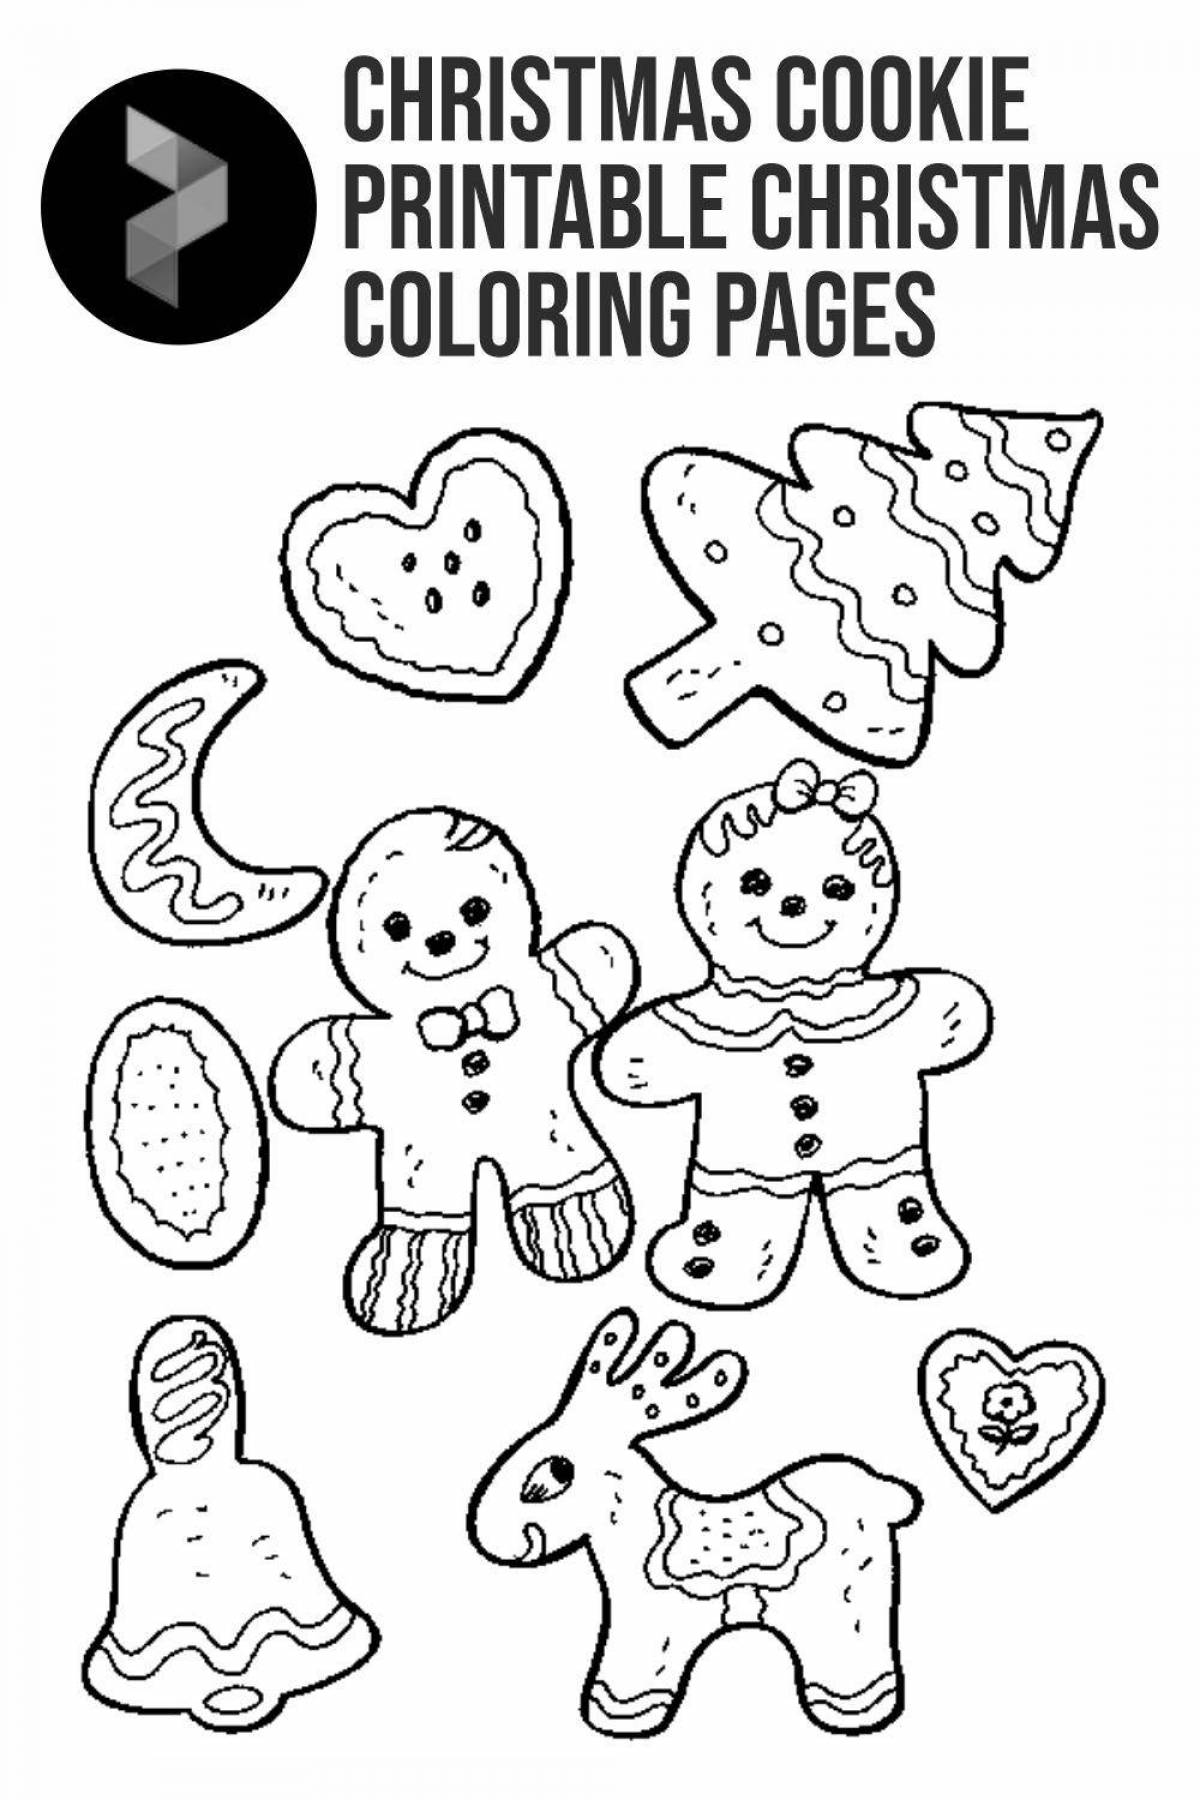 Excellent gingerbread coloring page